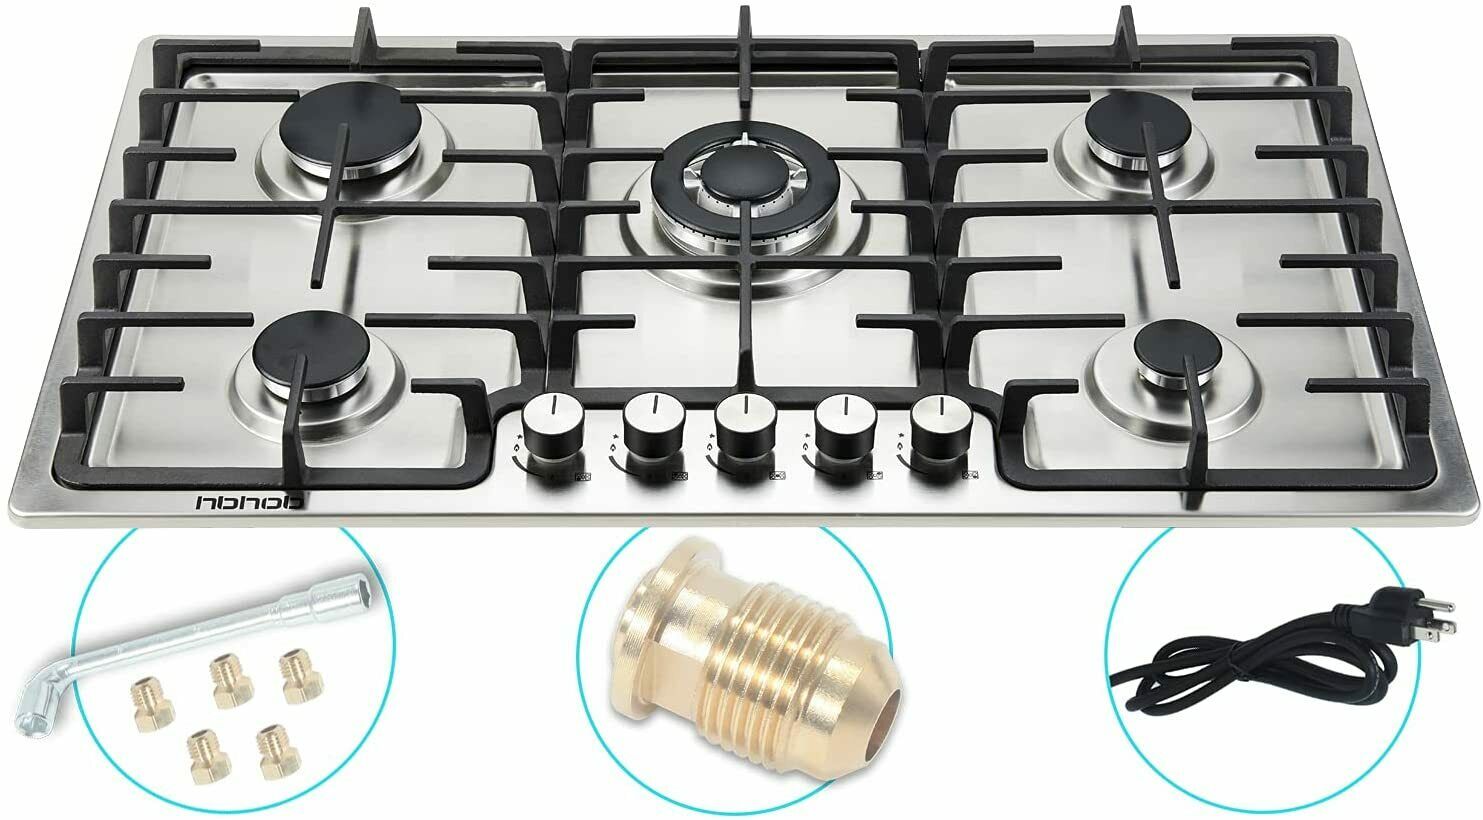 35 inches Gas Cooktop 5 Burners Gas Stove gas hob stovetop Stainless Steel Cookt